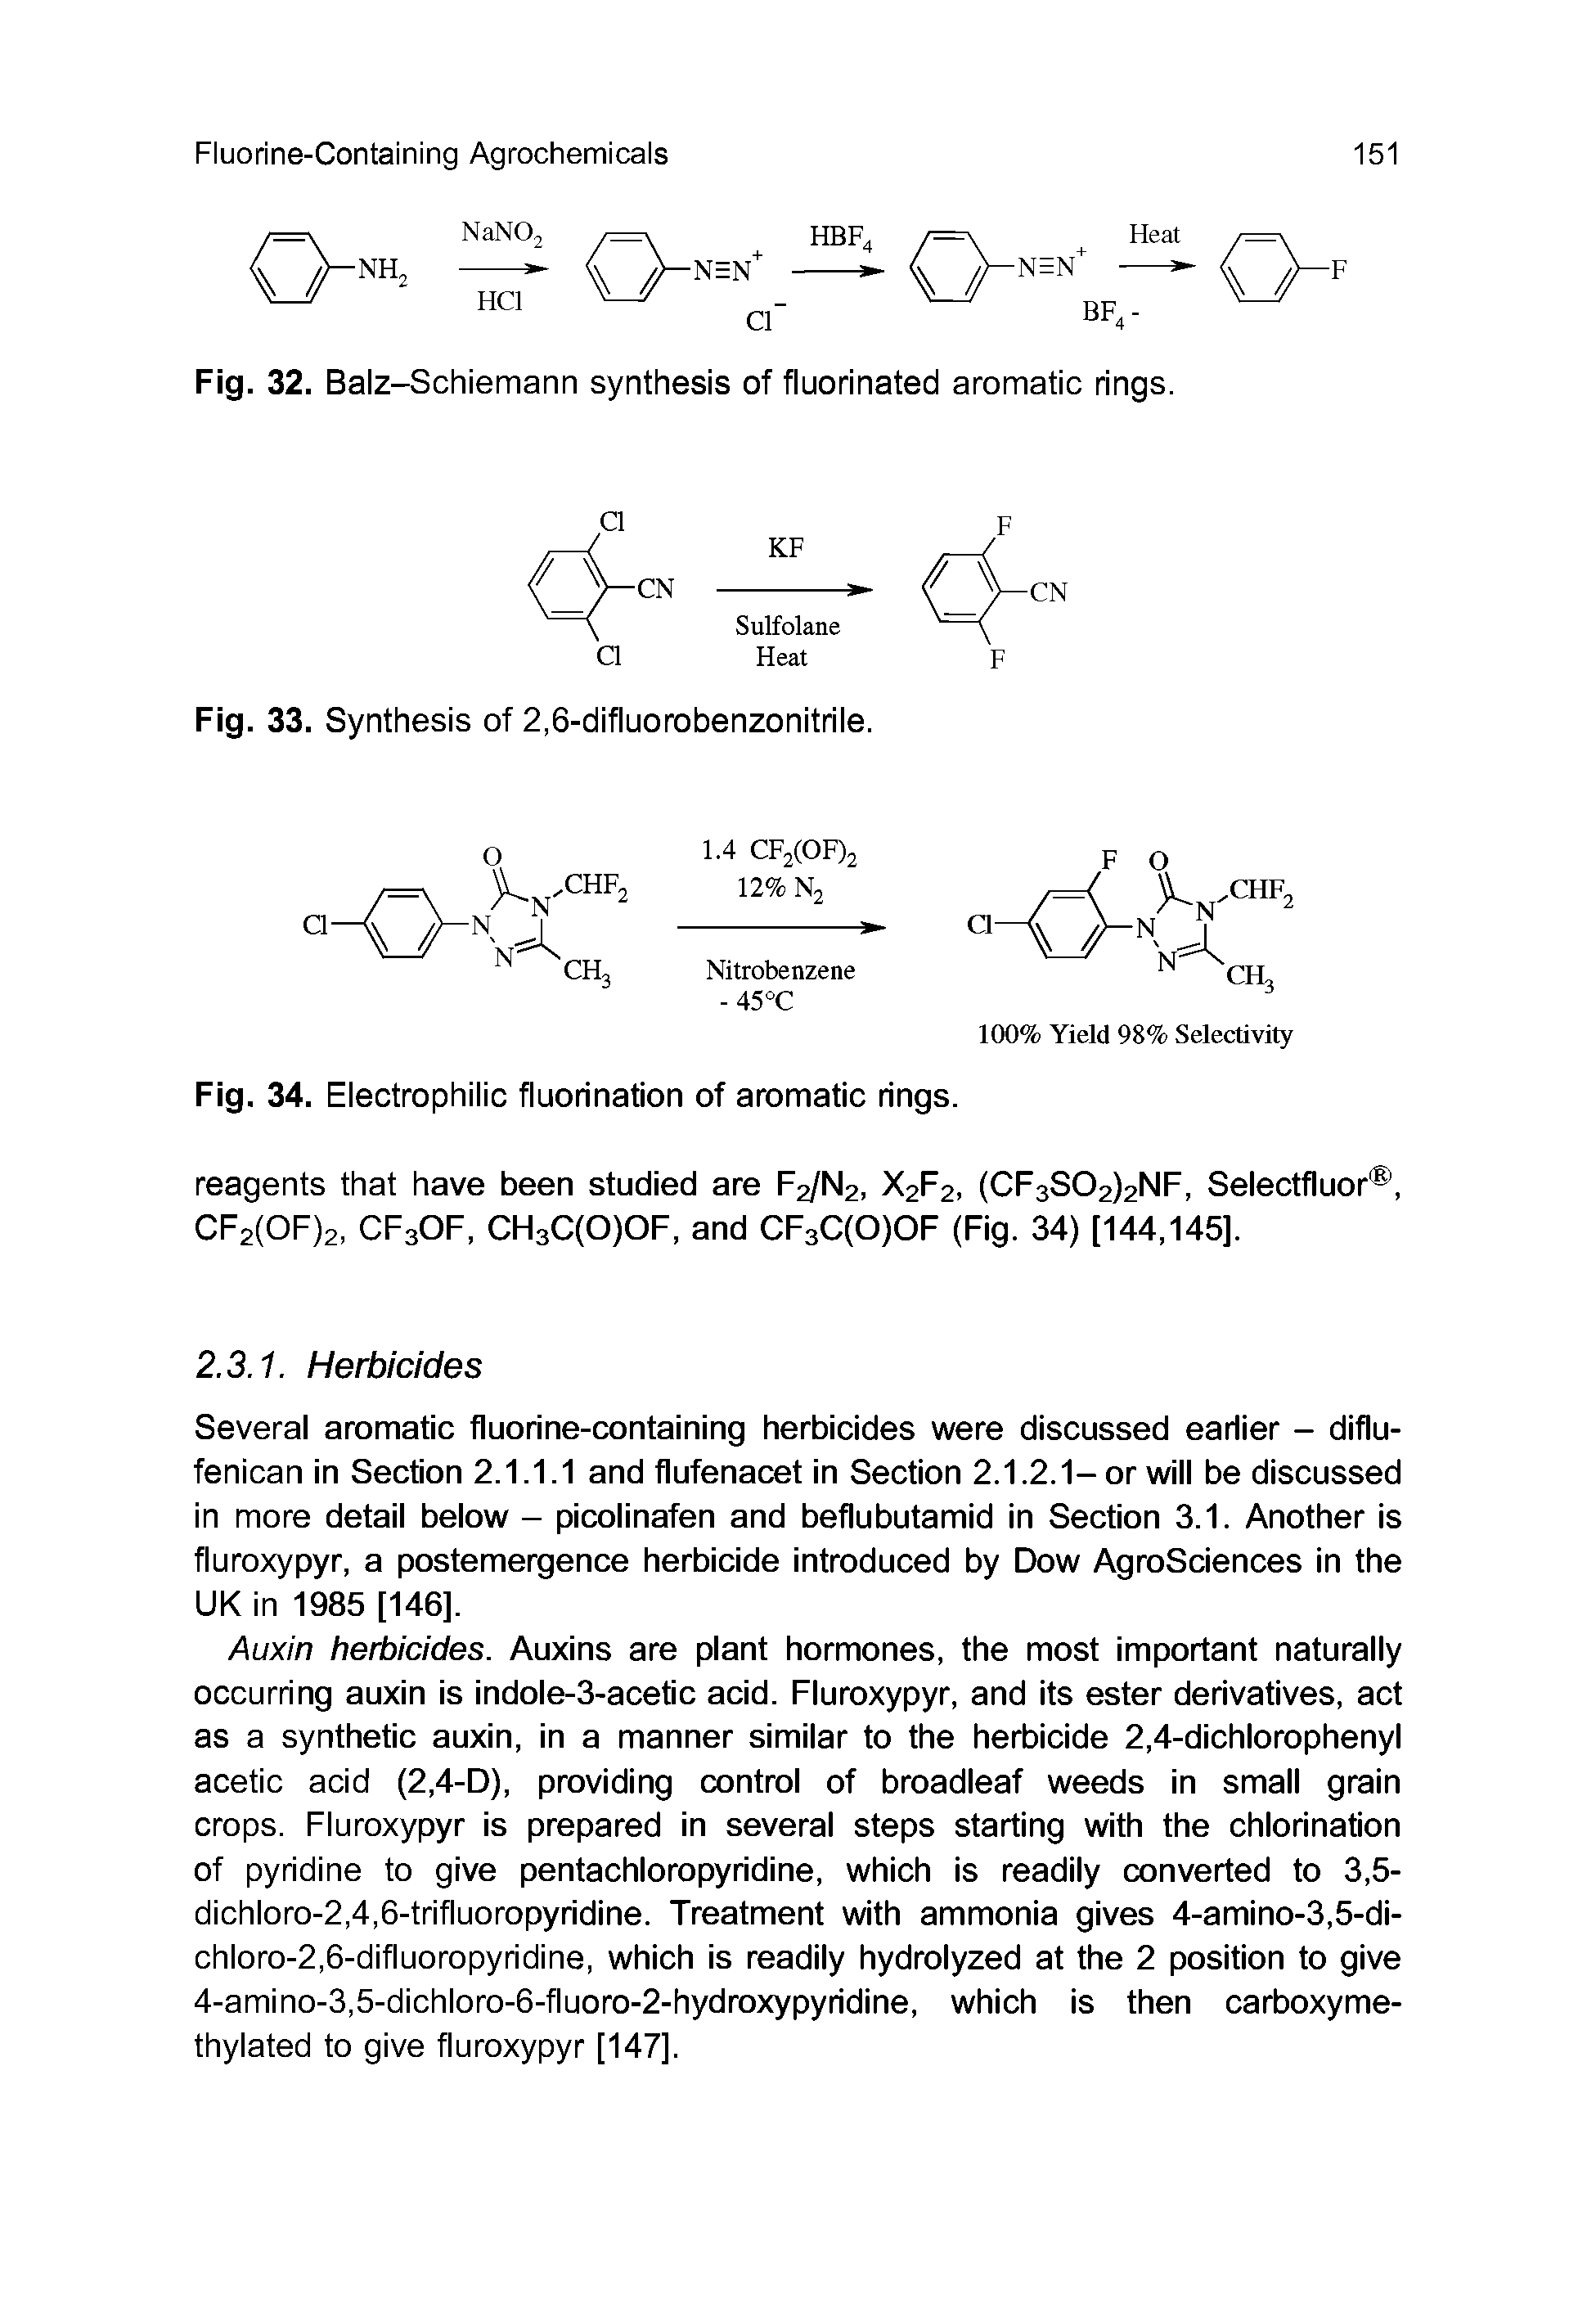 Fig. 32. Balz-Schiemann synthesis of fluorinated aromatic rings.